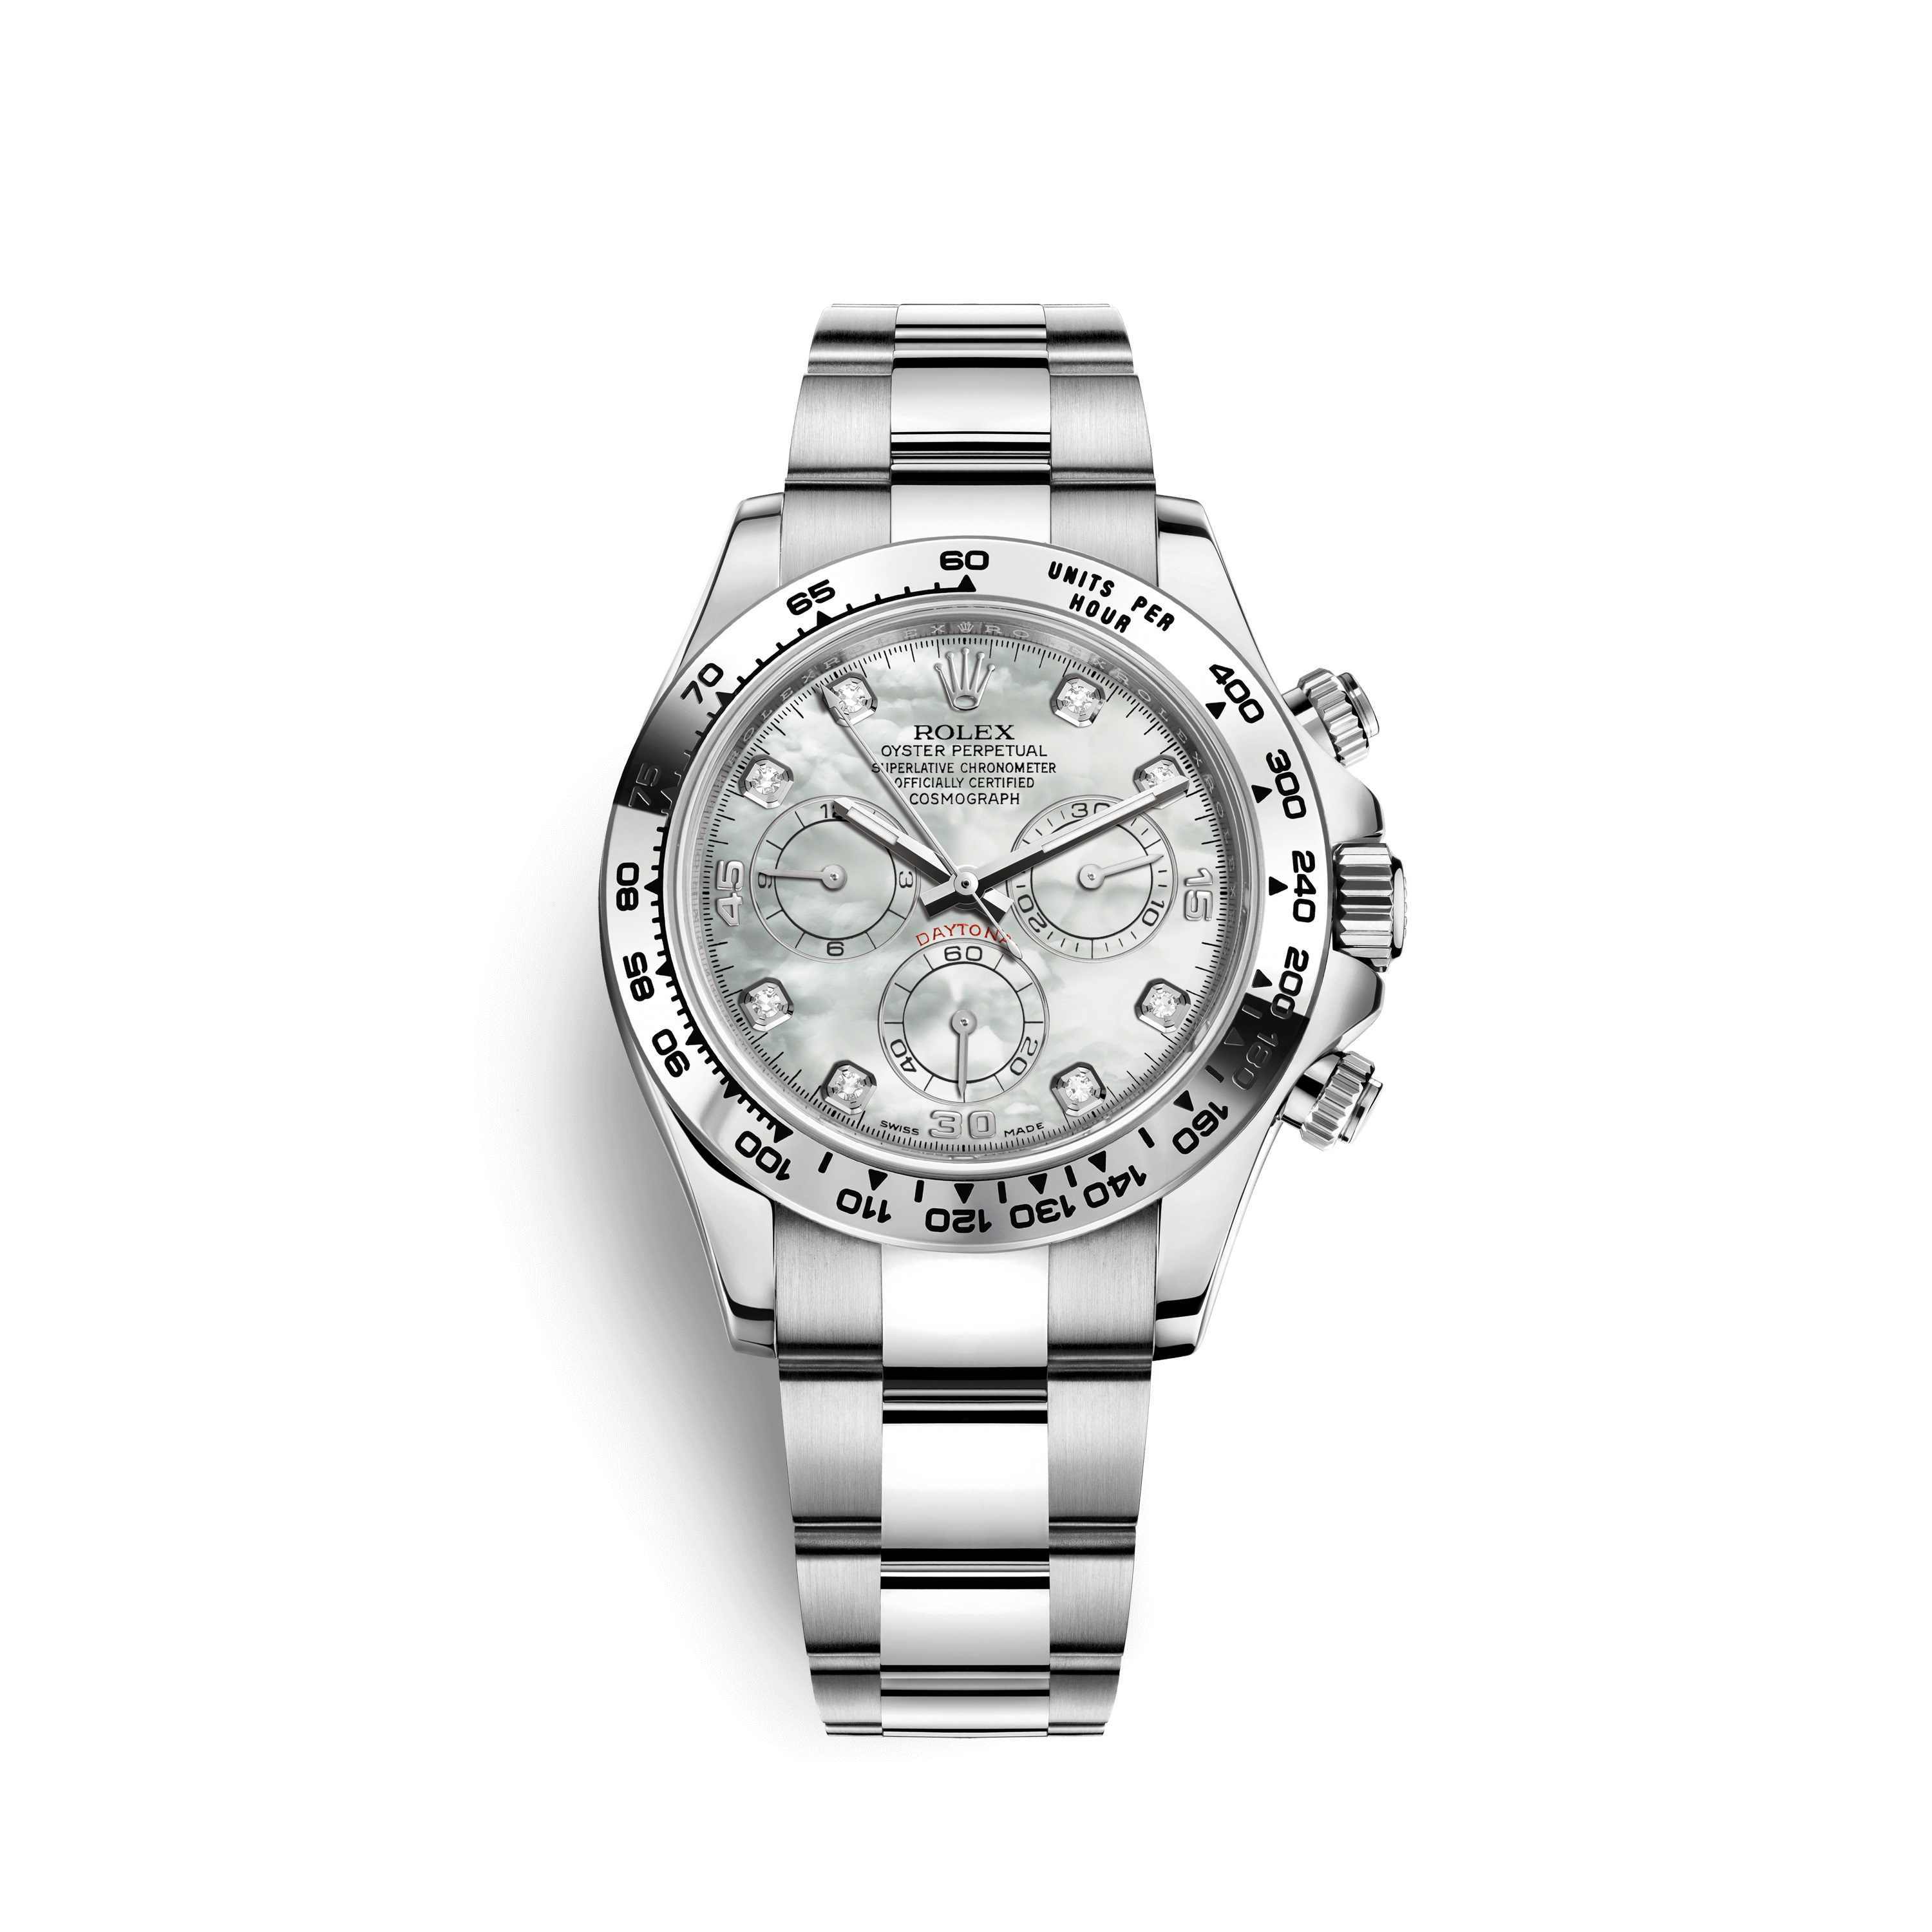 Cosmograph Daytona 116509 White Gold Watch (White Mother-of-Pearl Set with Diamonds)